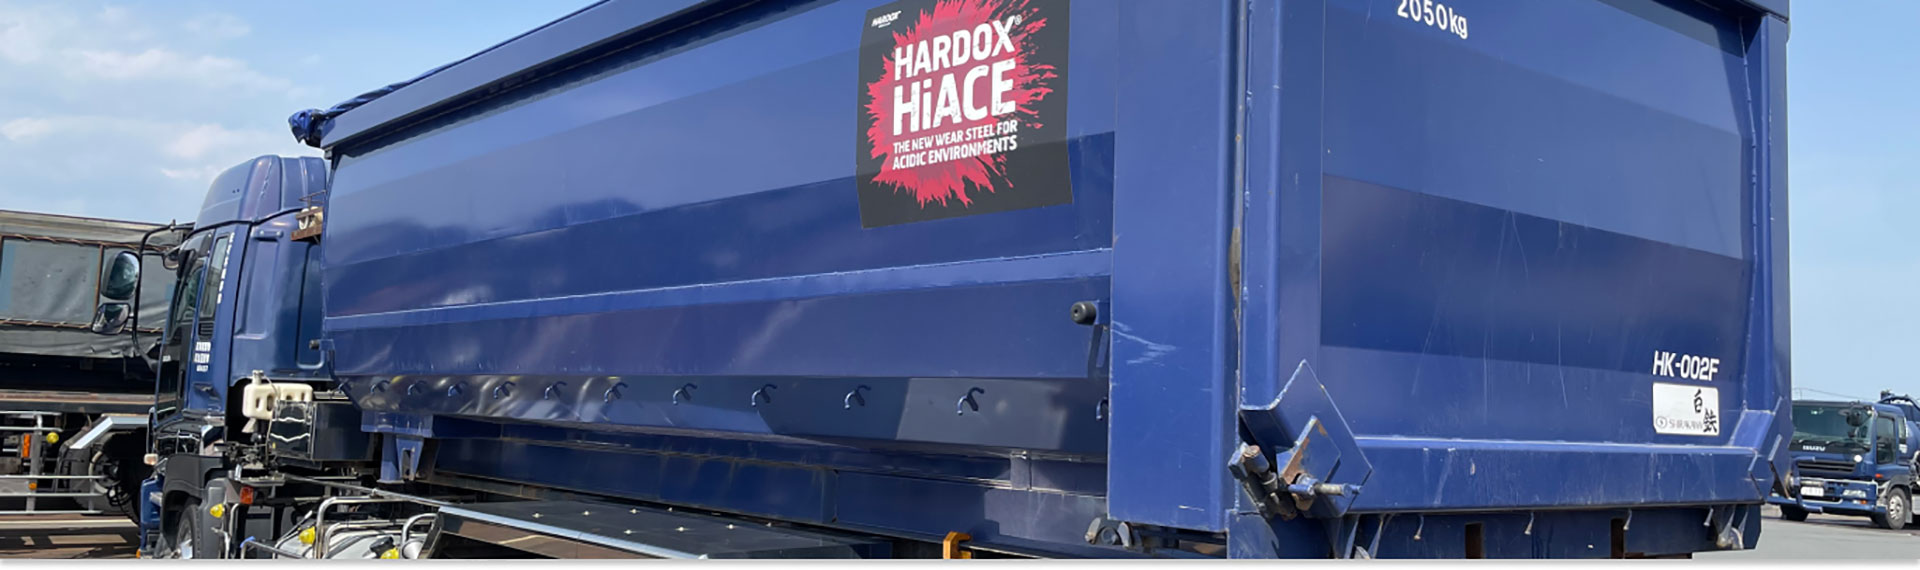 Deep blue truck body made in Hardox® Hi Ace steel for corrosive environments.